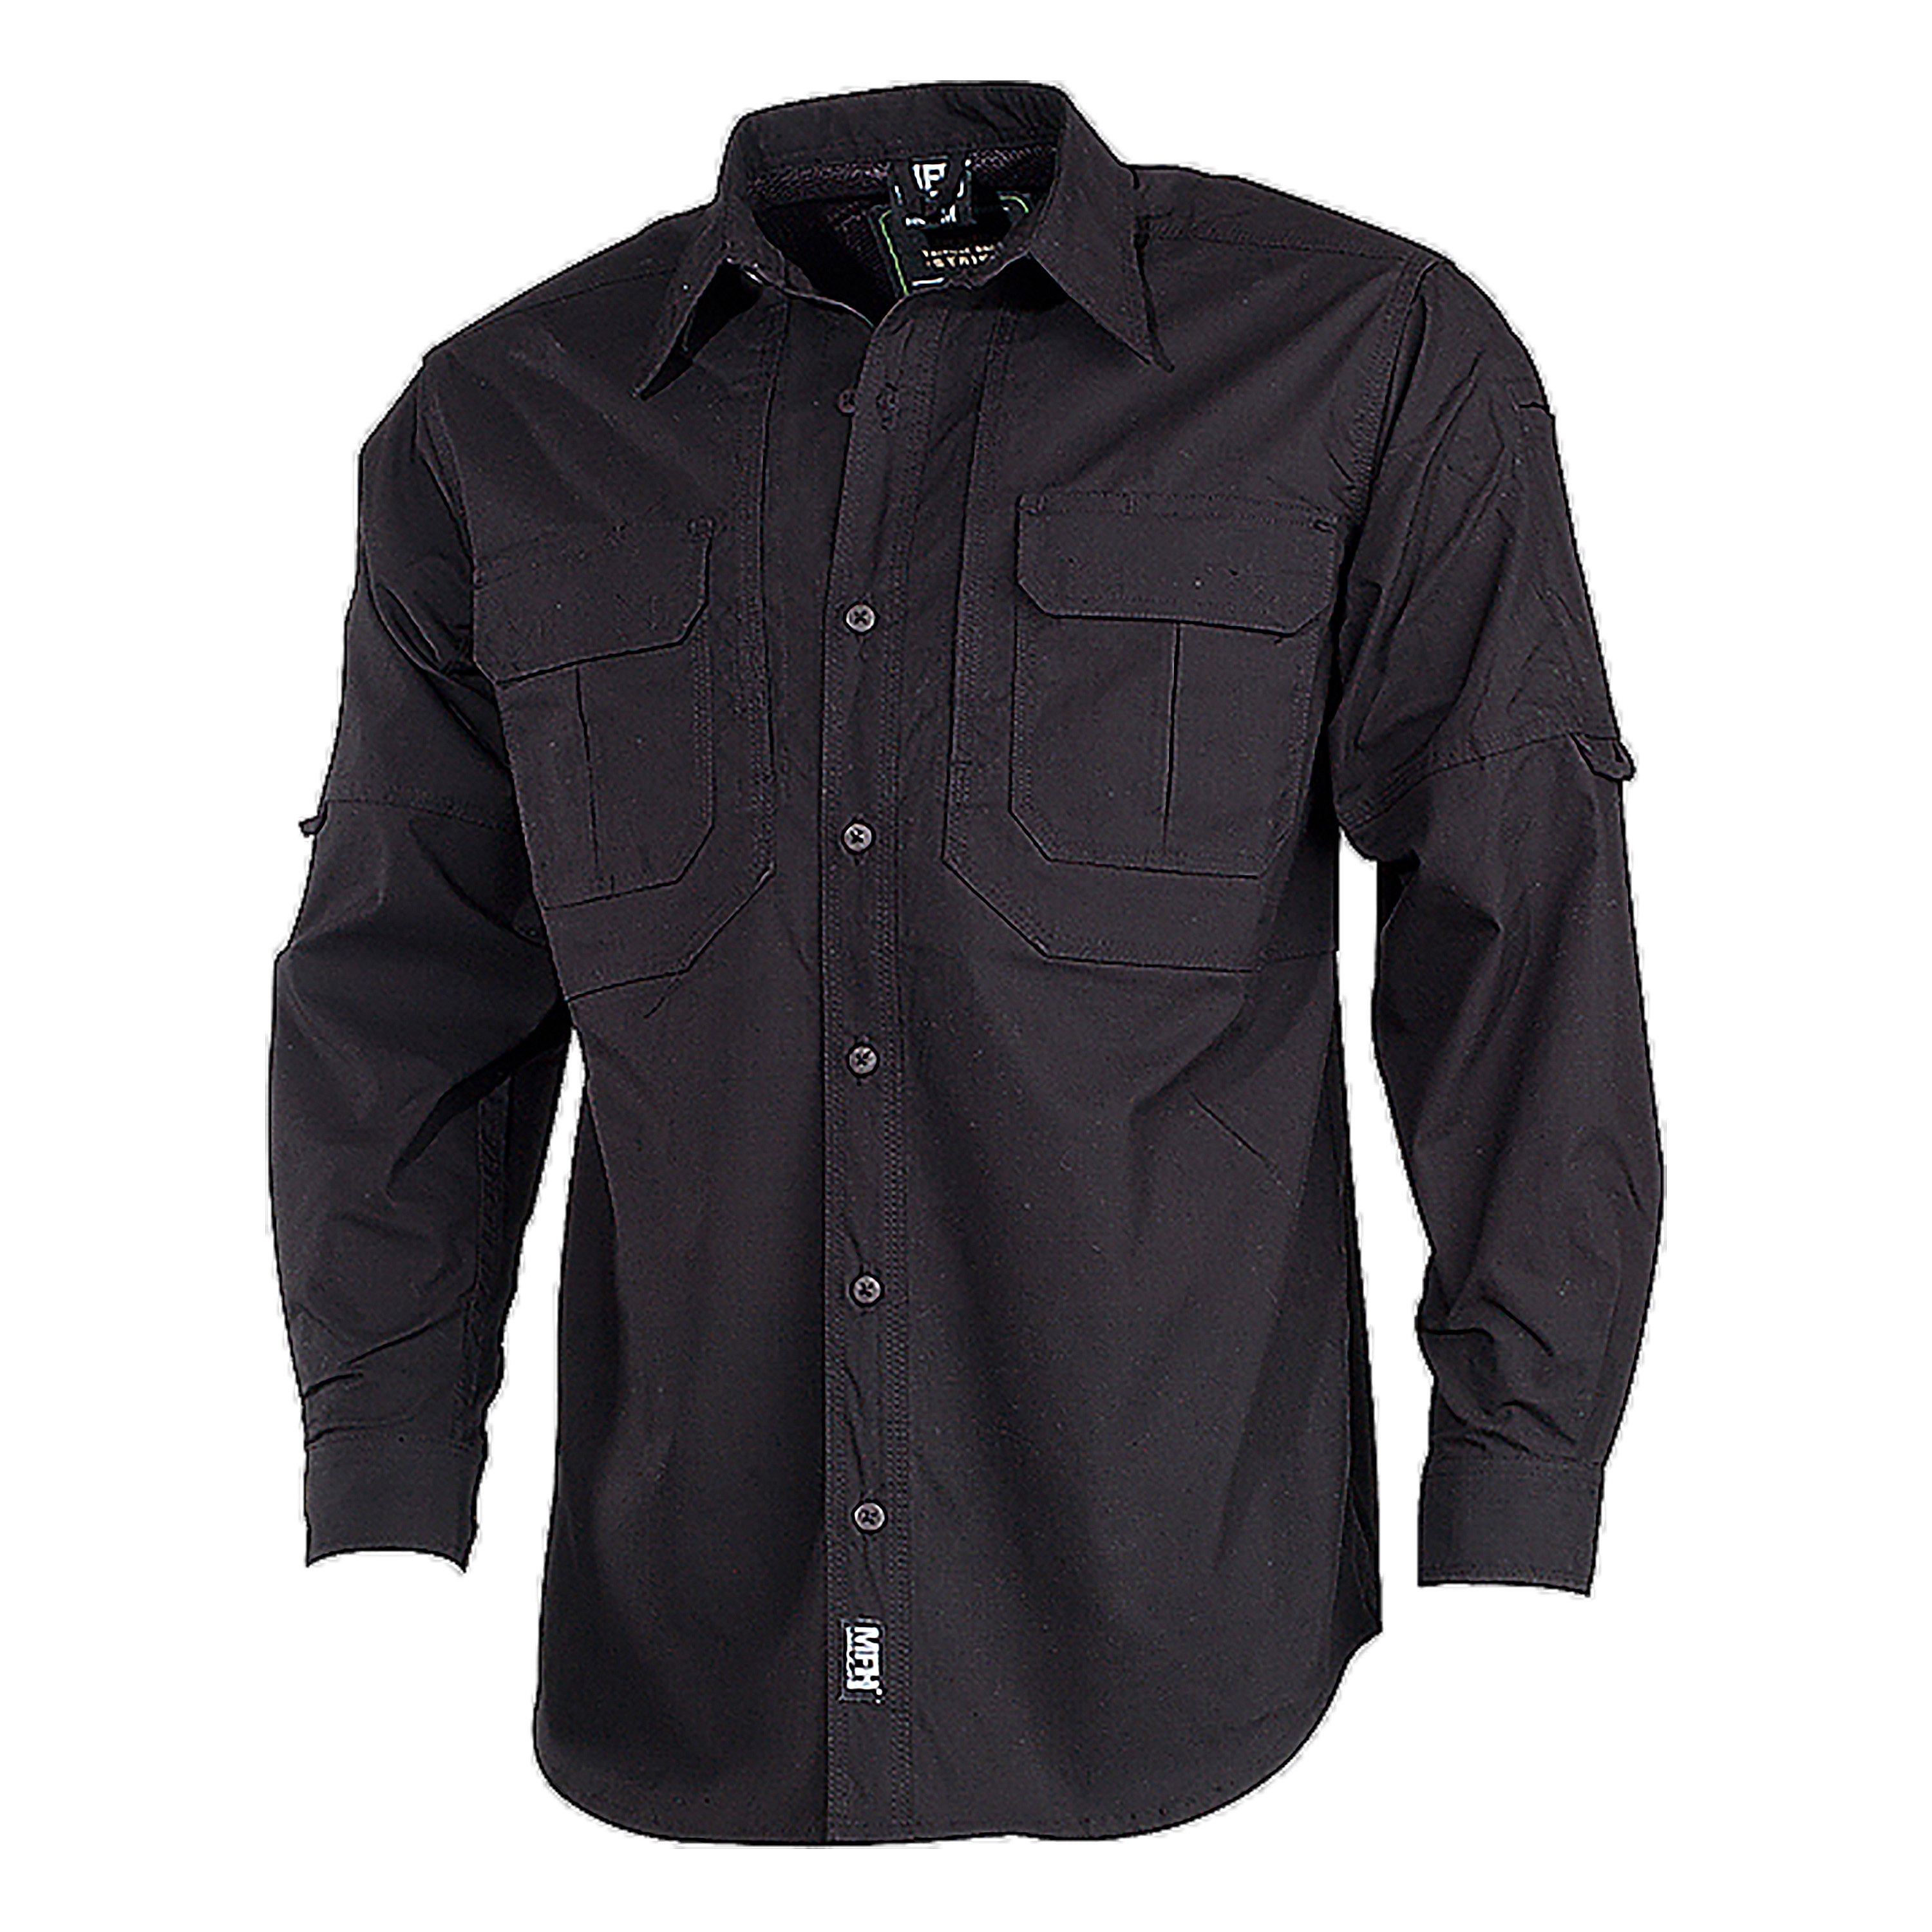 Purchase the MFH Tactical Long Arm Shirt Strike black by ASMC